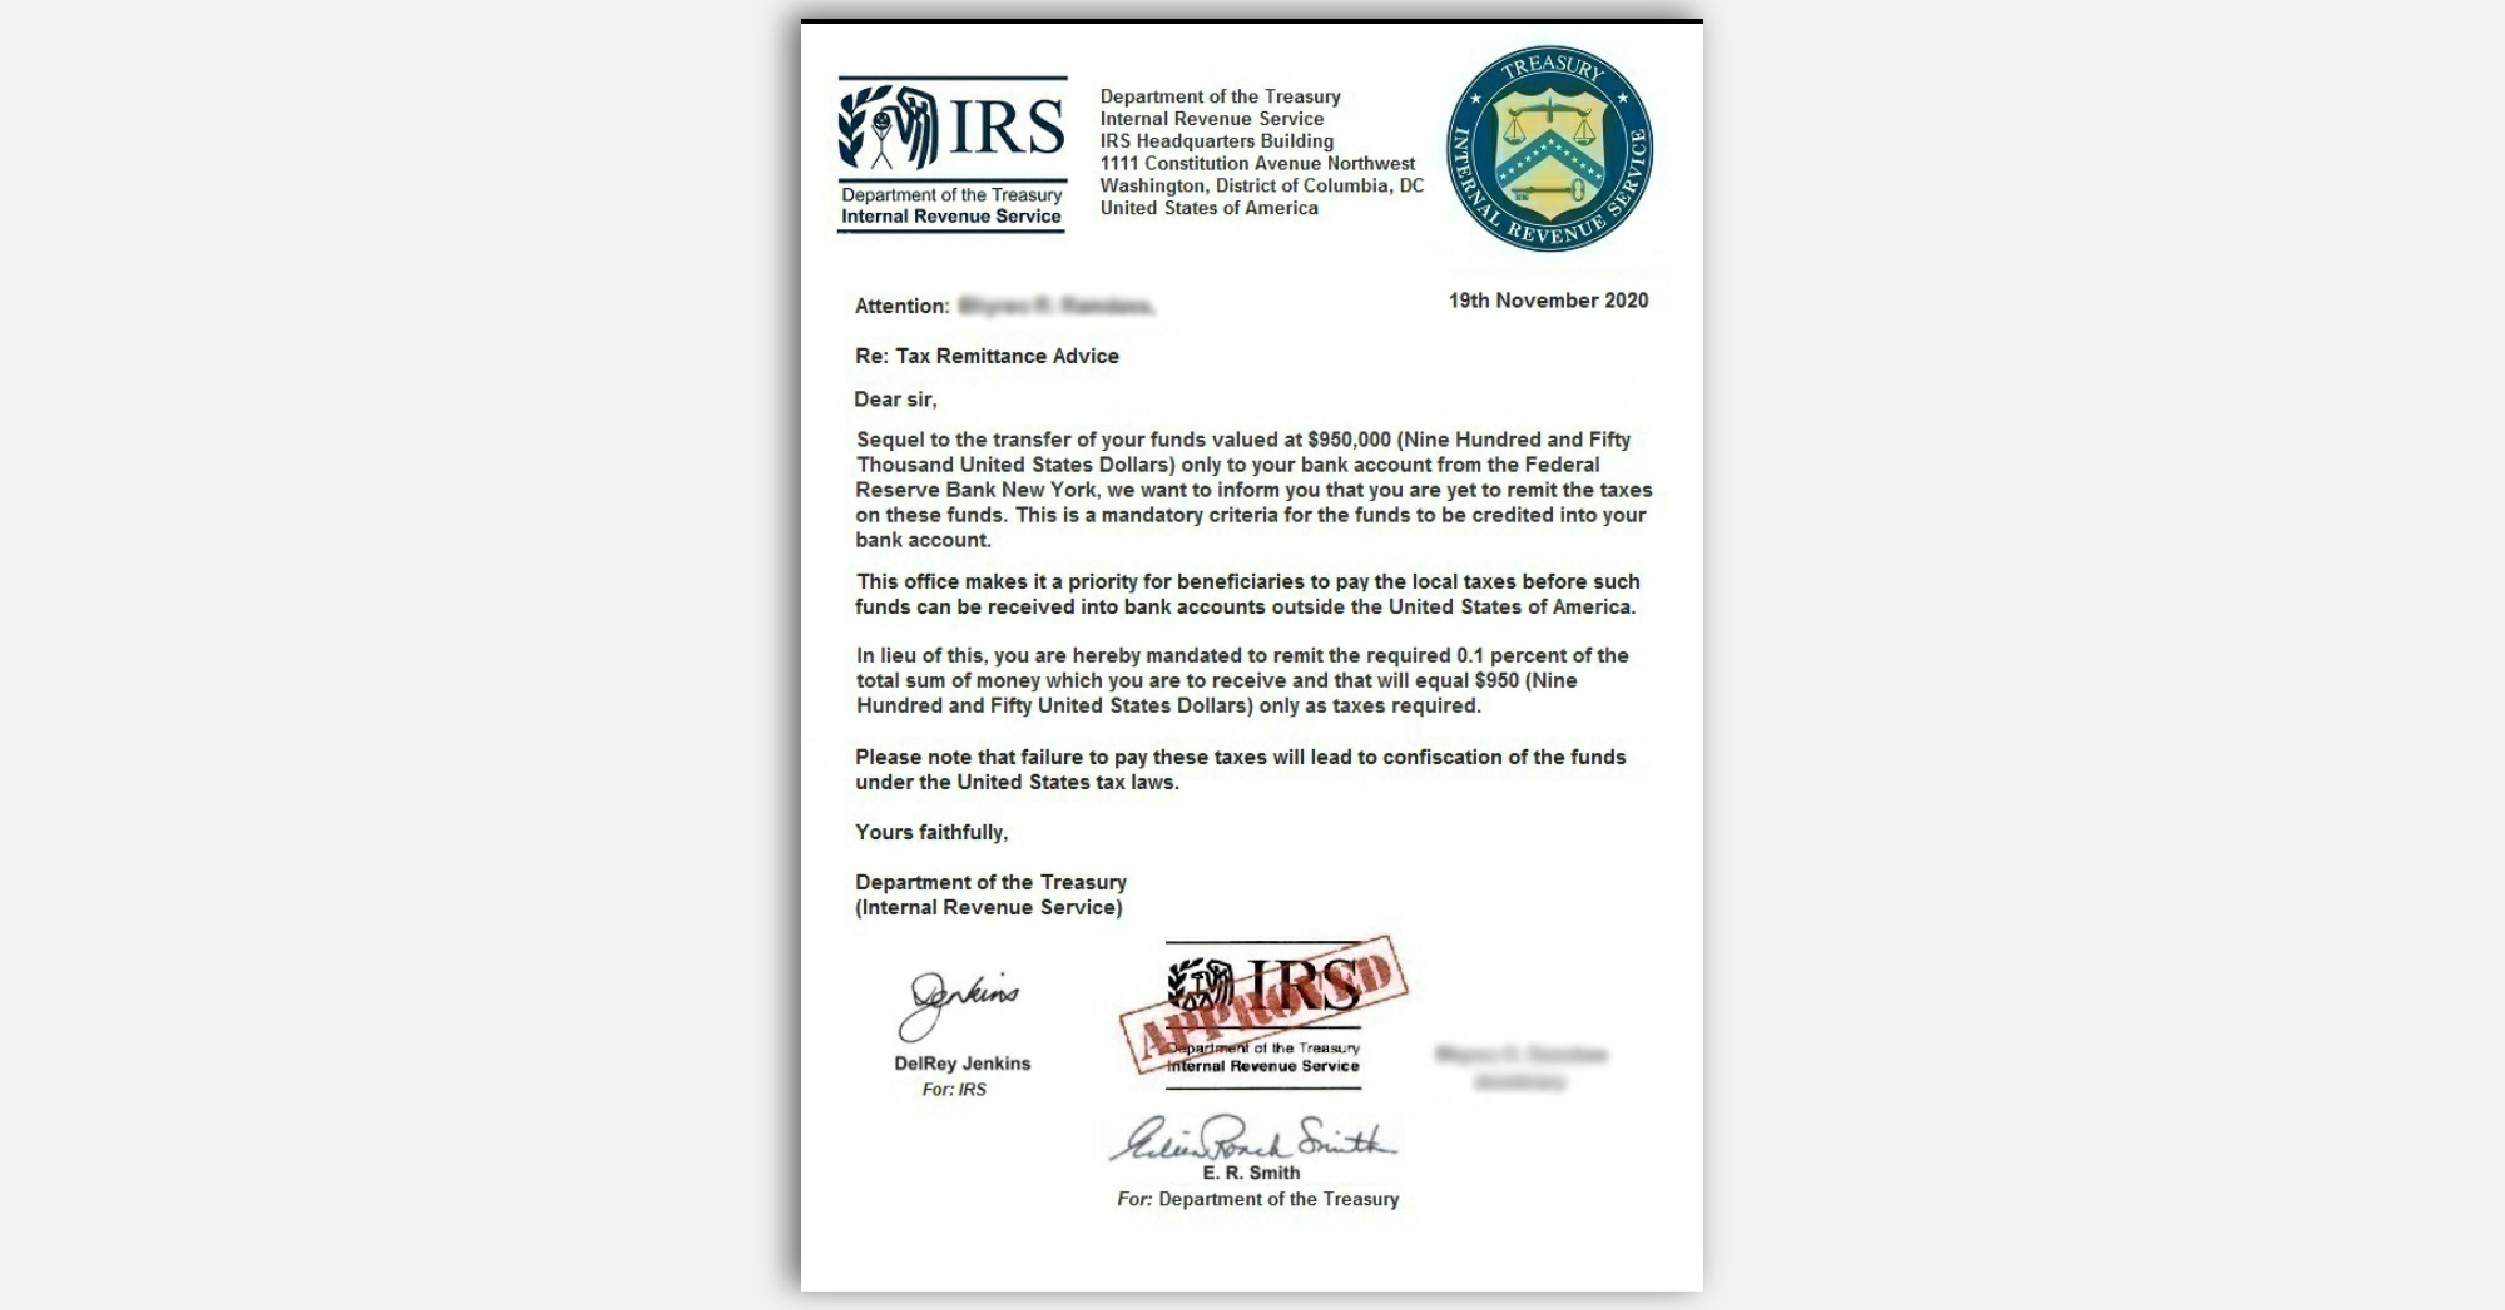 FTC impersonator scam fake IRS letter